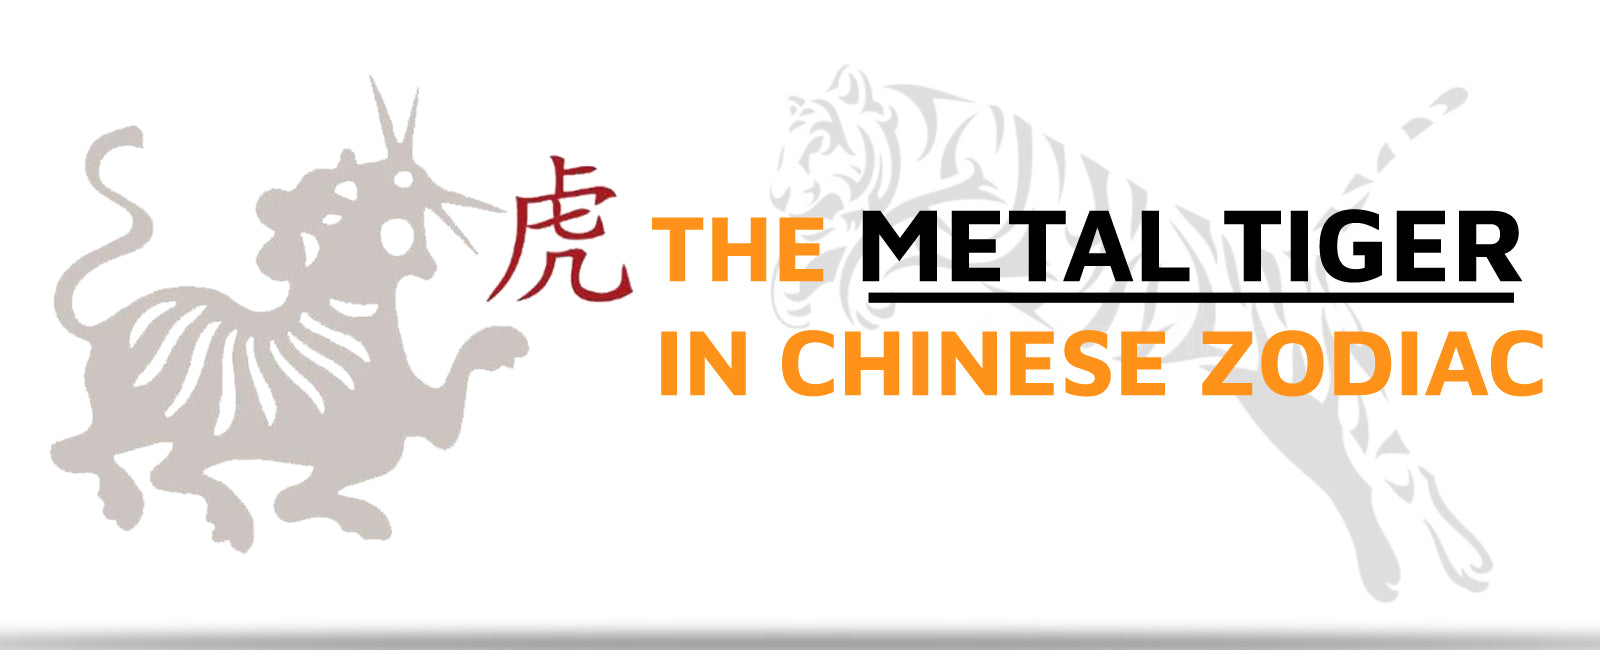 The Metal Tiger in Chinese Zodiac